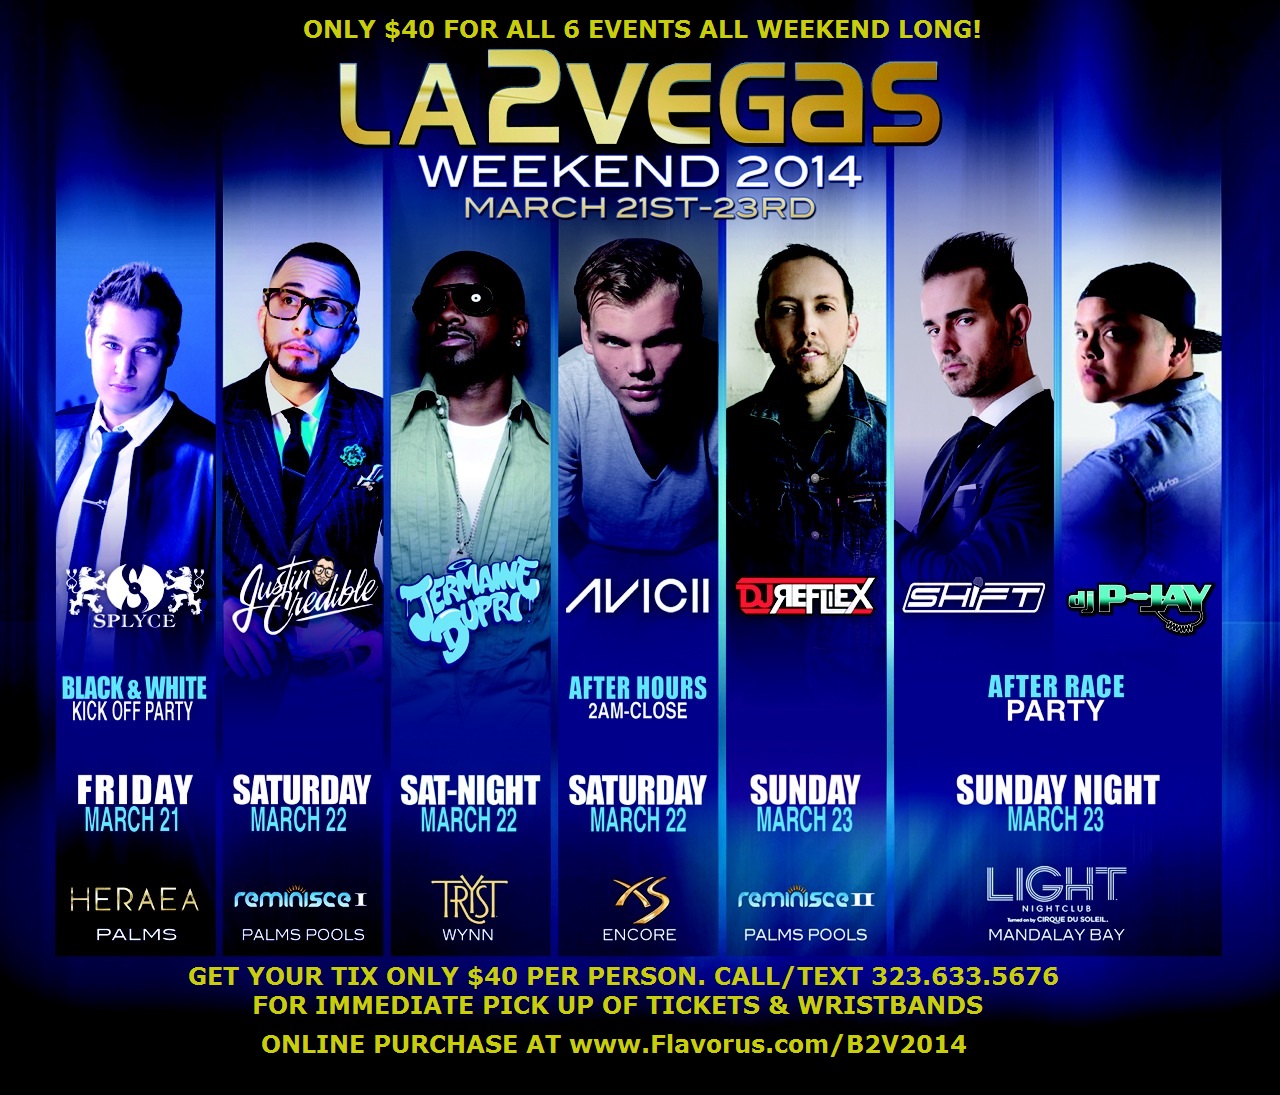 Buy Tickets to BAKER 2 VEGAS Official Party in Las Vegas